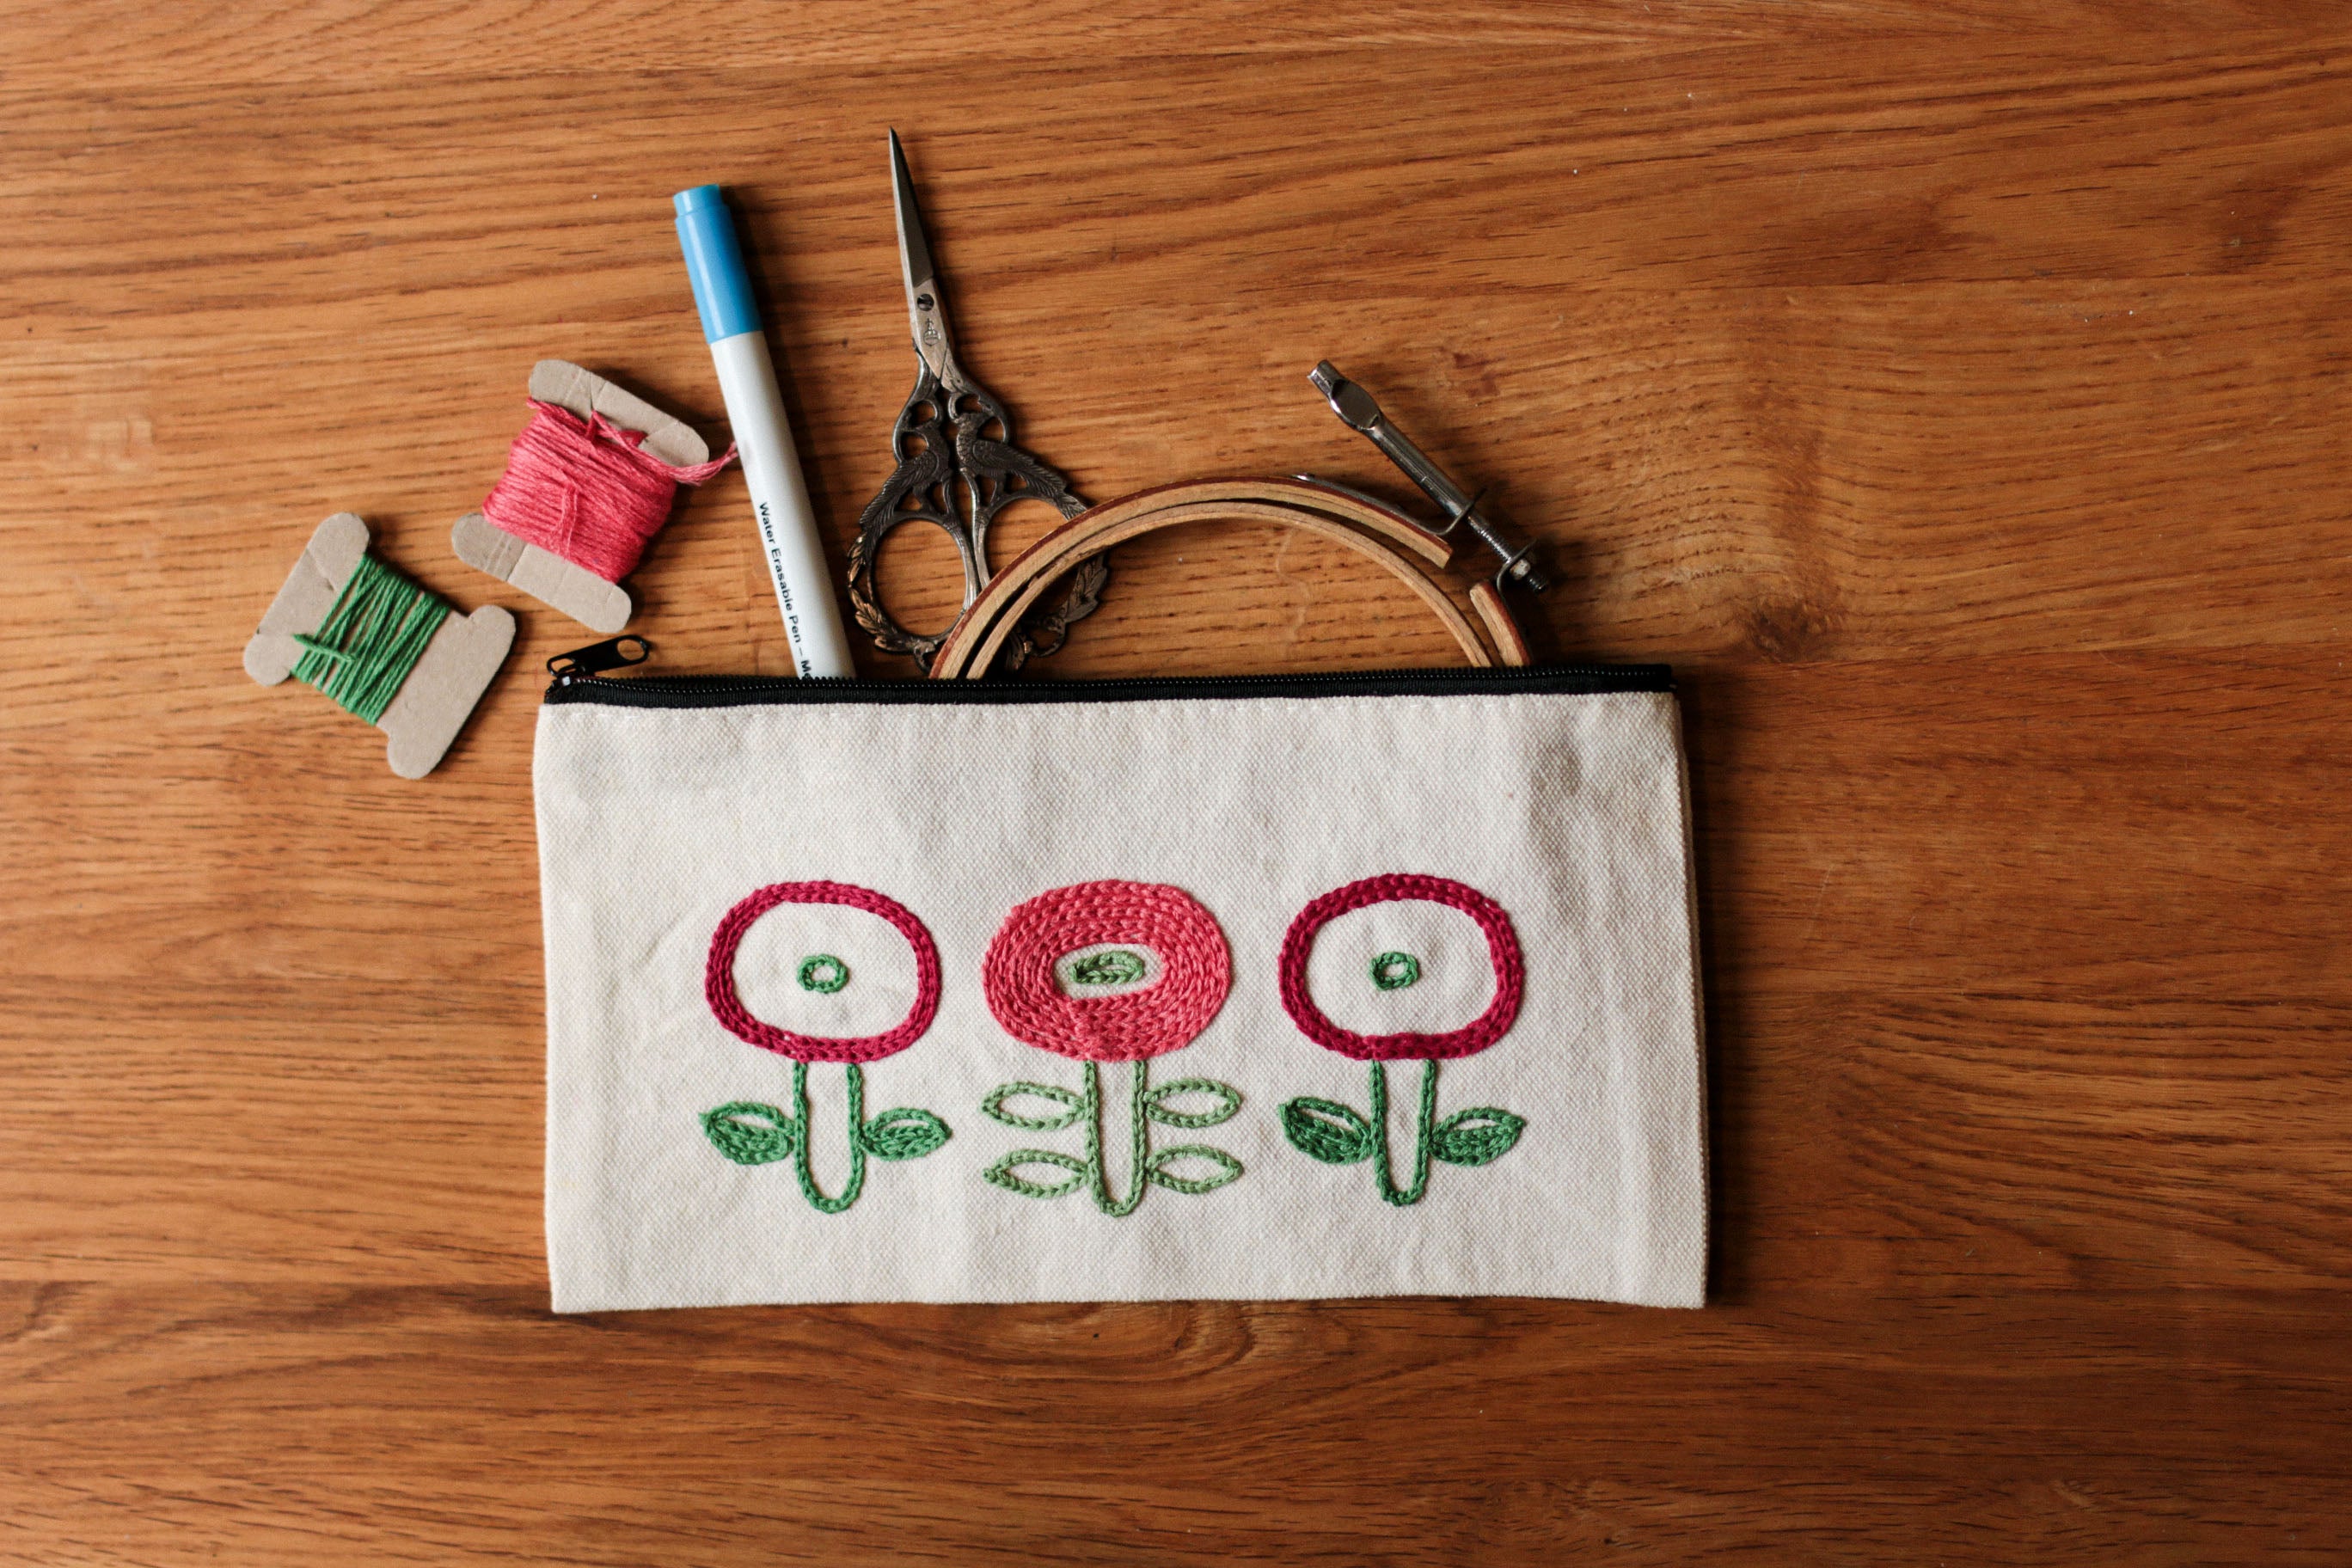 Small zipper pouch bag embroidery